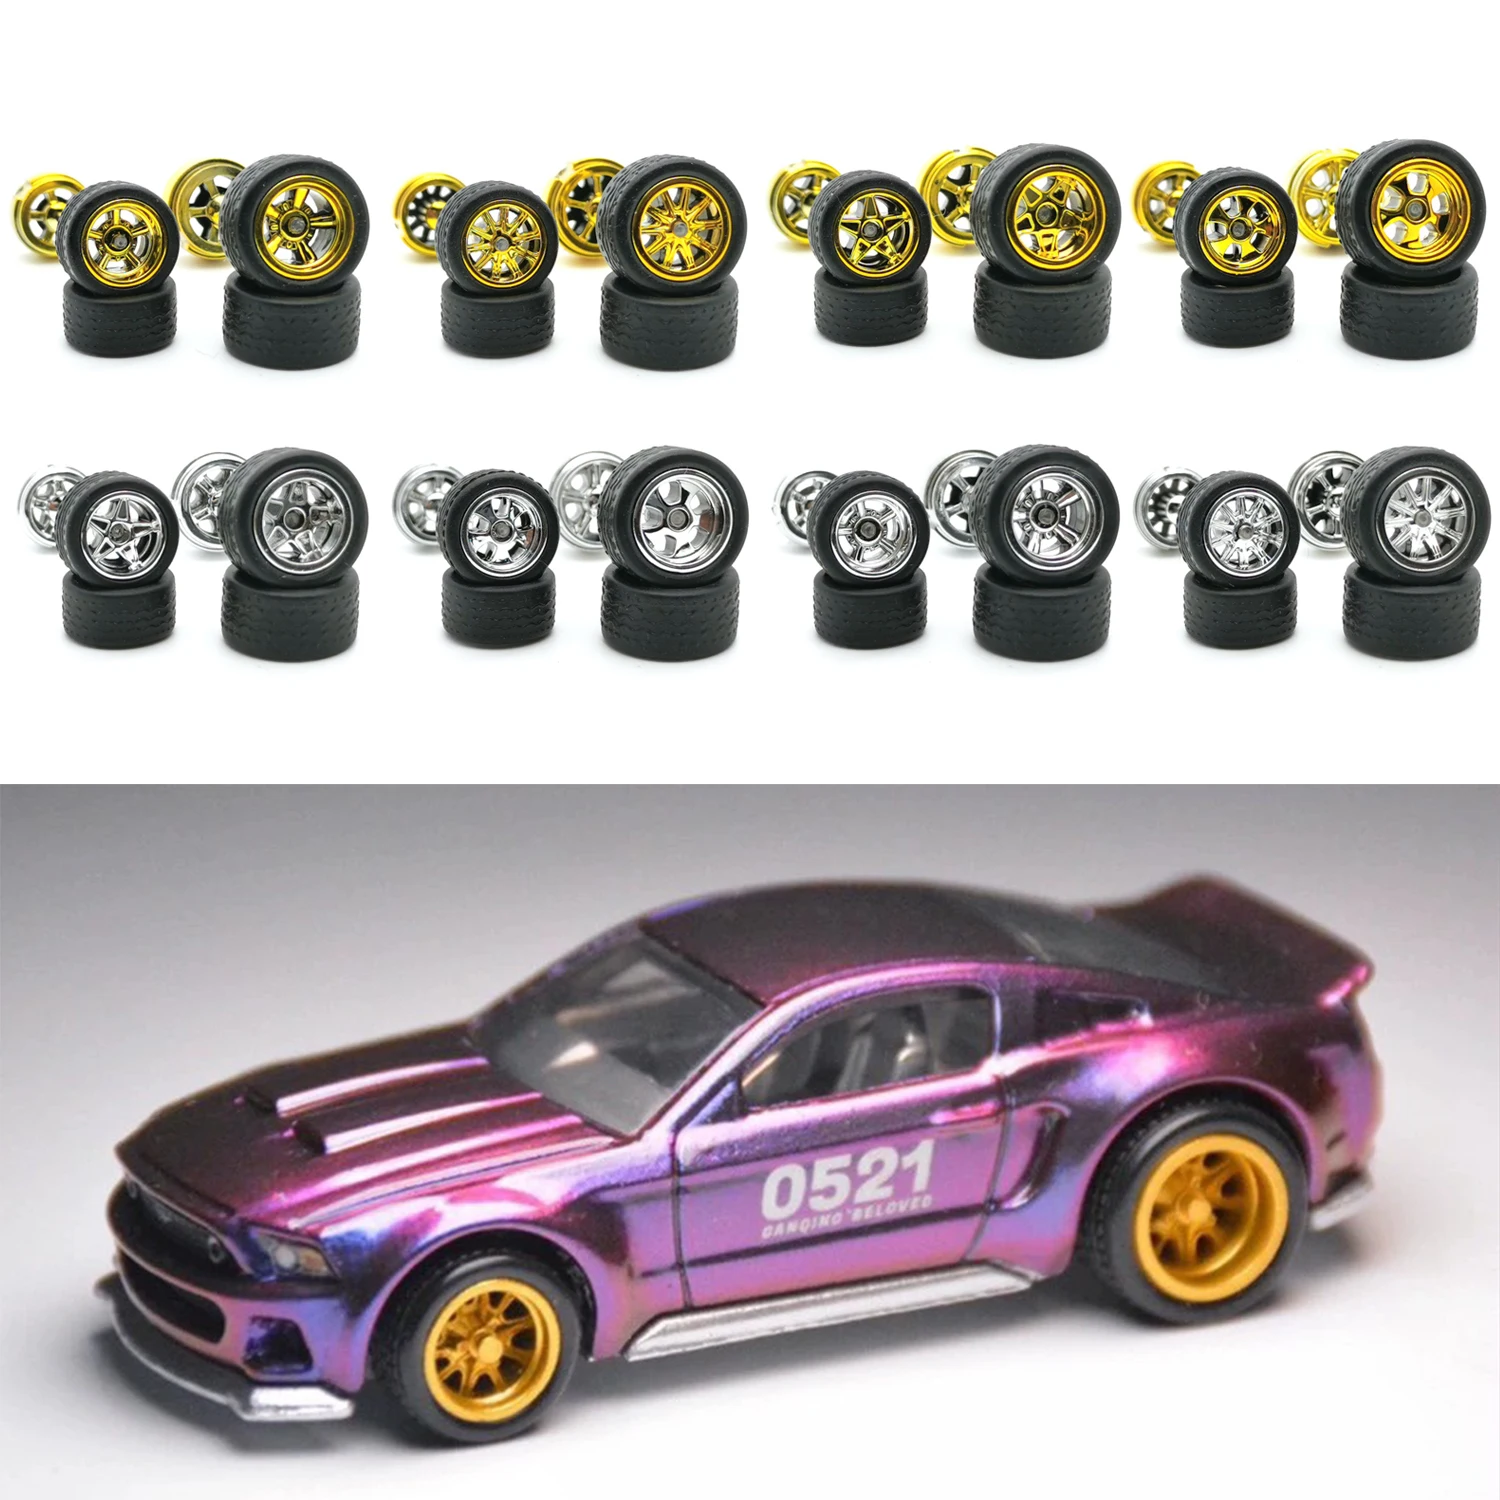 1/64 Wheels for Model Cars with Rubber Tires Cars Upgrade for Matchbox/Domeka/Minigt Toy Car Diecast Modified Kit